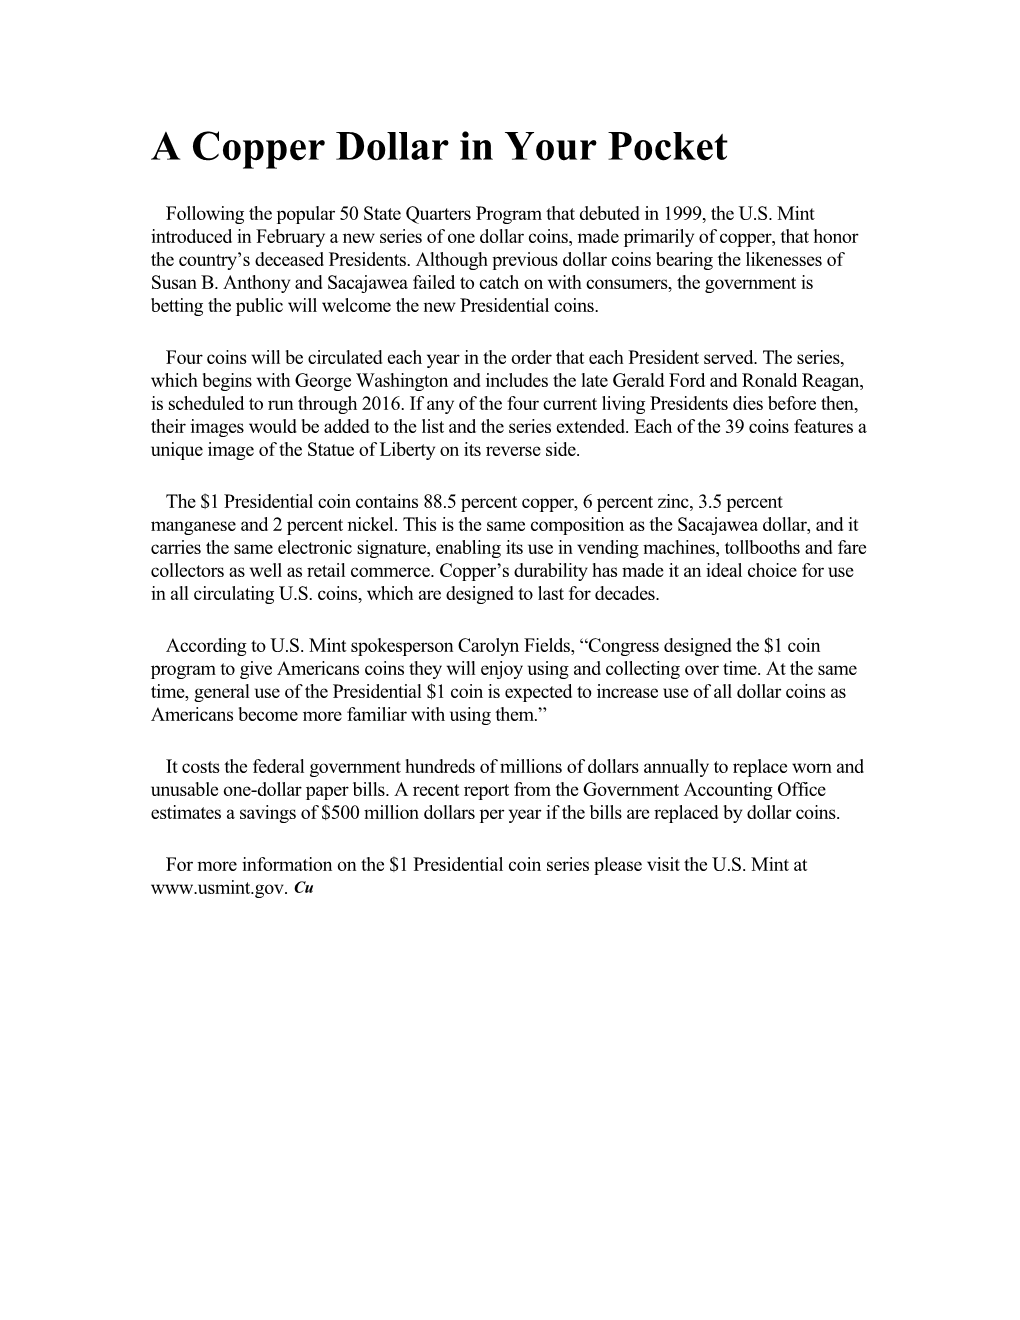 A Copper Dollar in Your Pocket